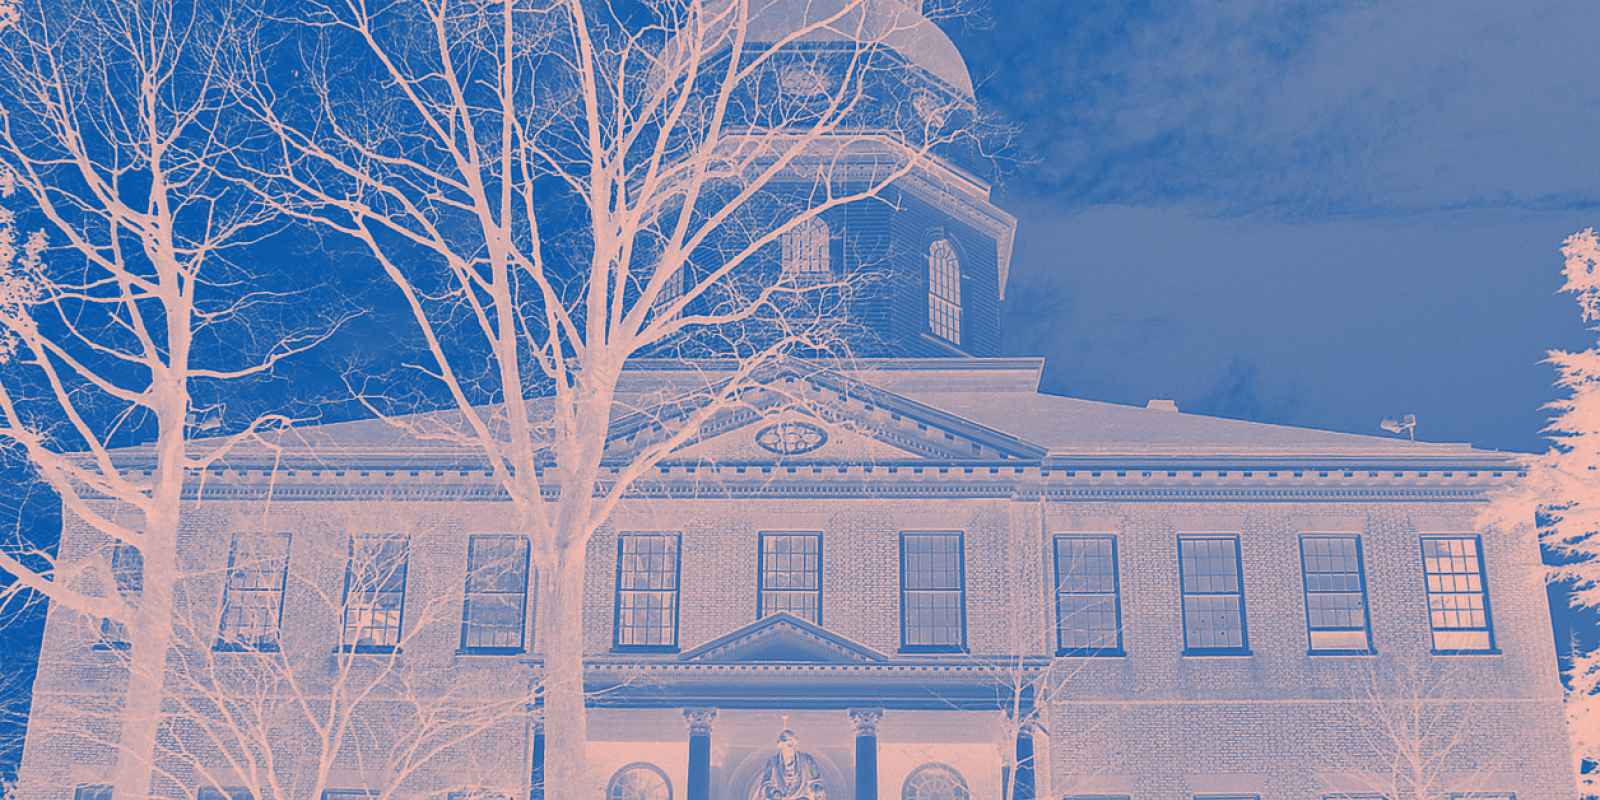 Maryland State House in Annapolis has a bitmap treatment over it with pink and blue angled lines.